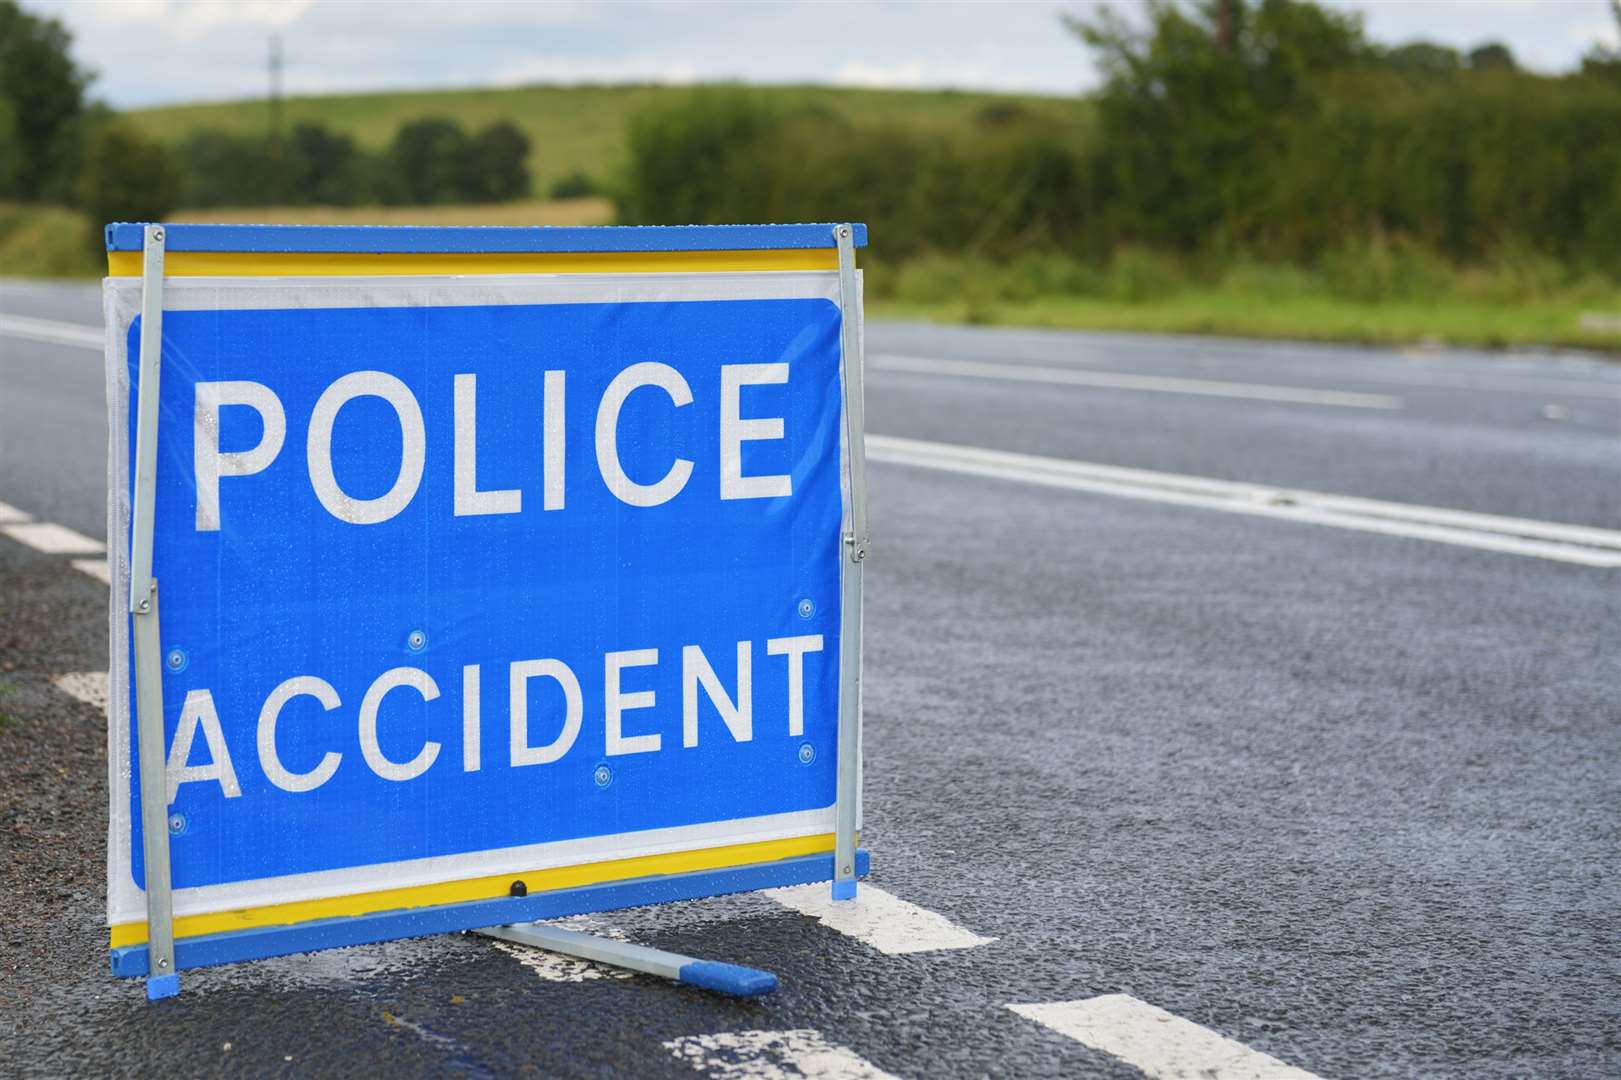 The serious collision happened at Postling near Hythe